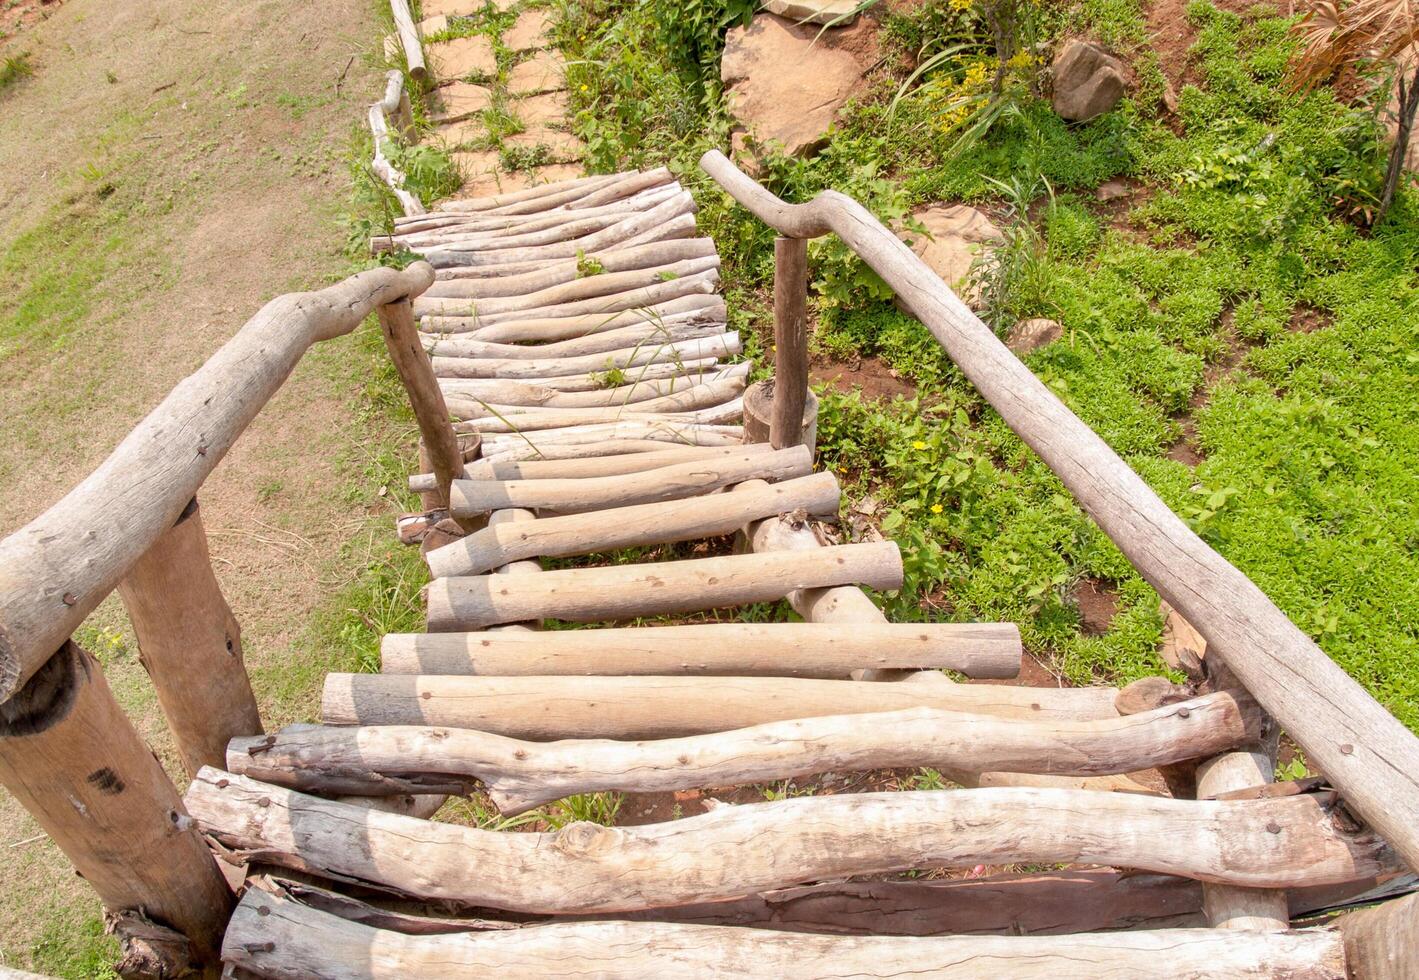 Staircase made of wood that is outdoors, Showing a path down to the ground with green grass. photo